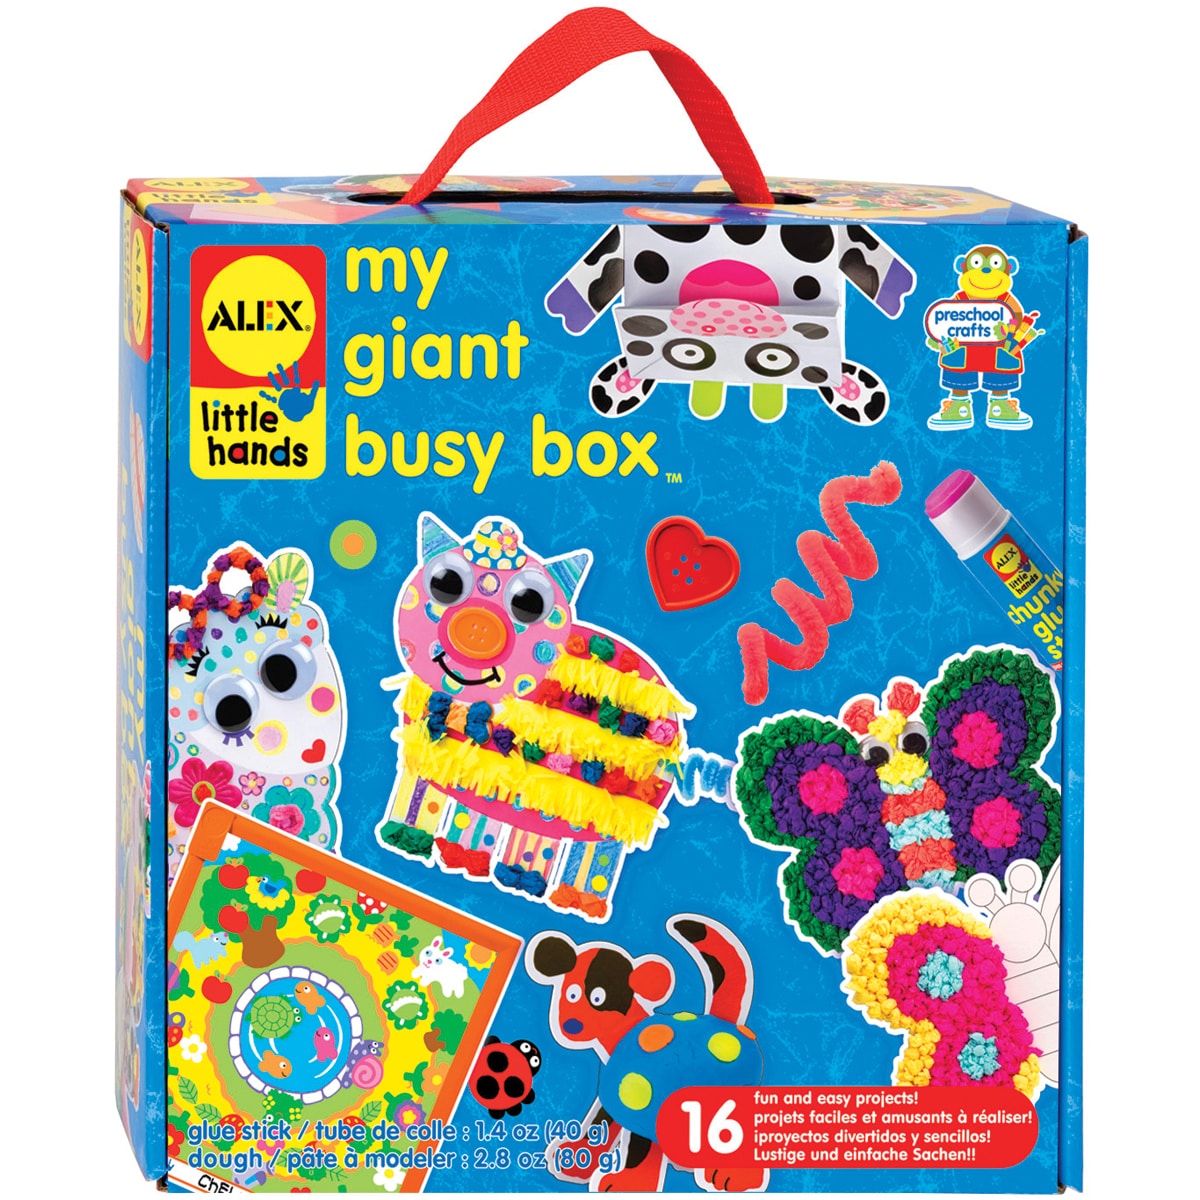 giant busy box